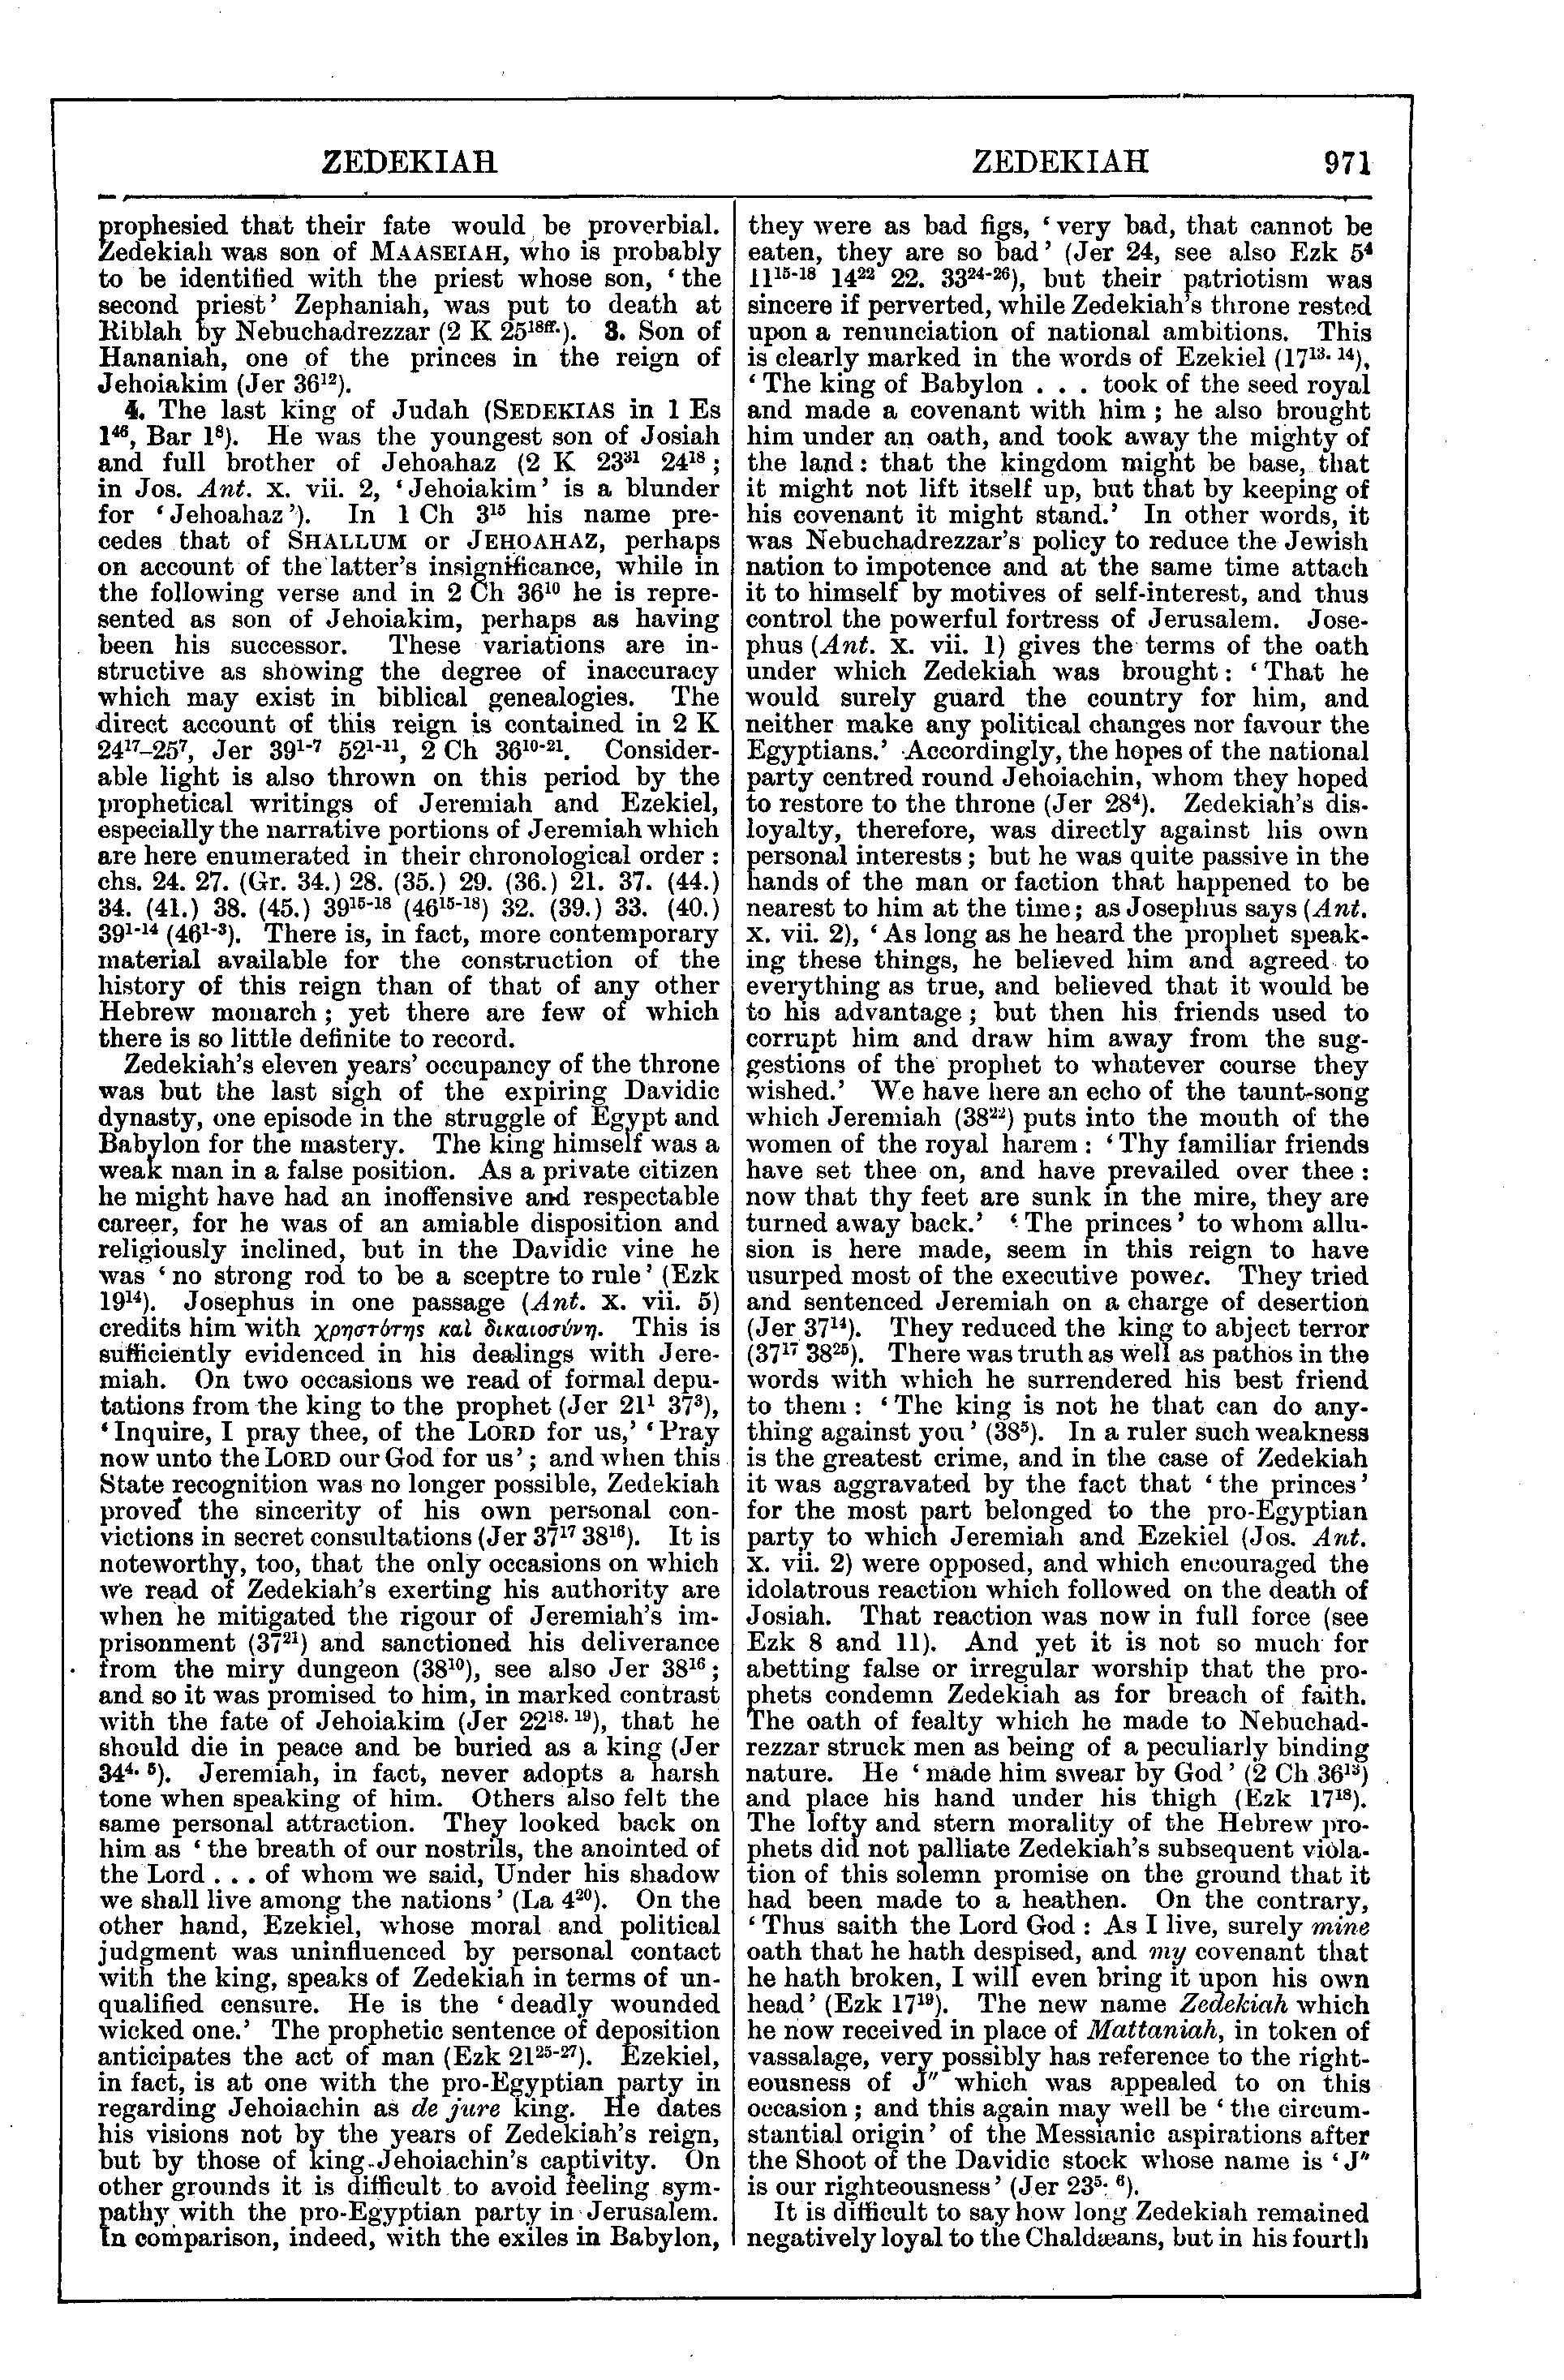 Image of page 971